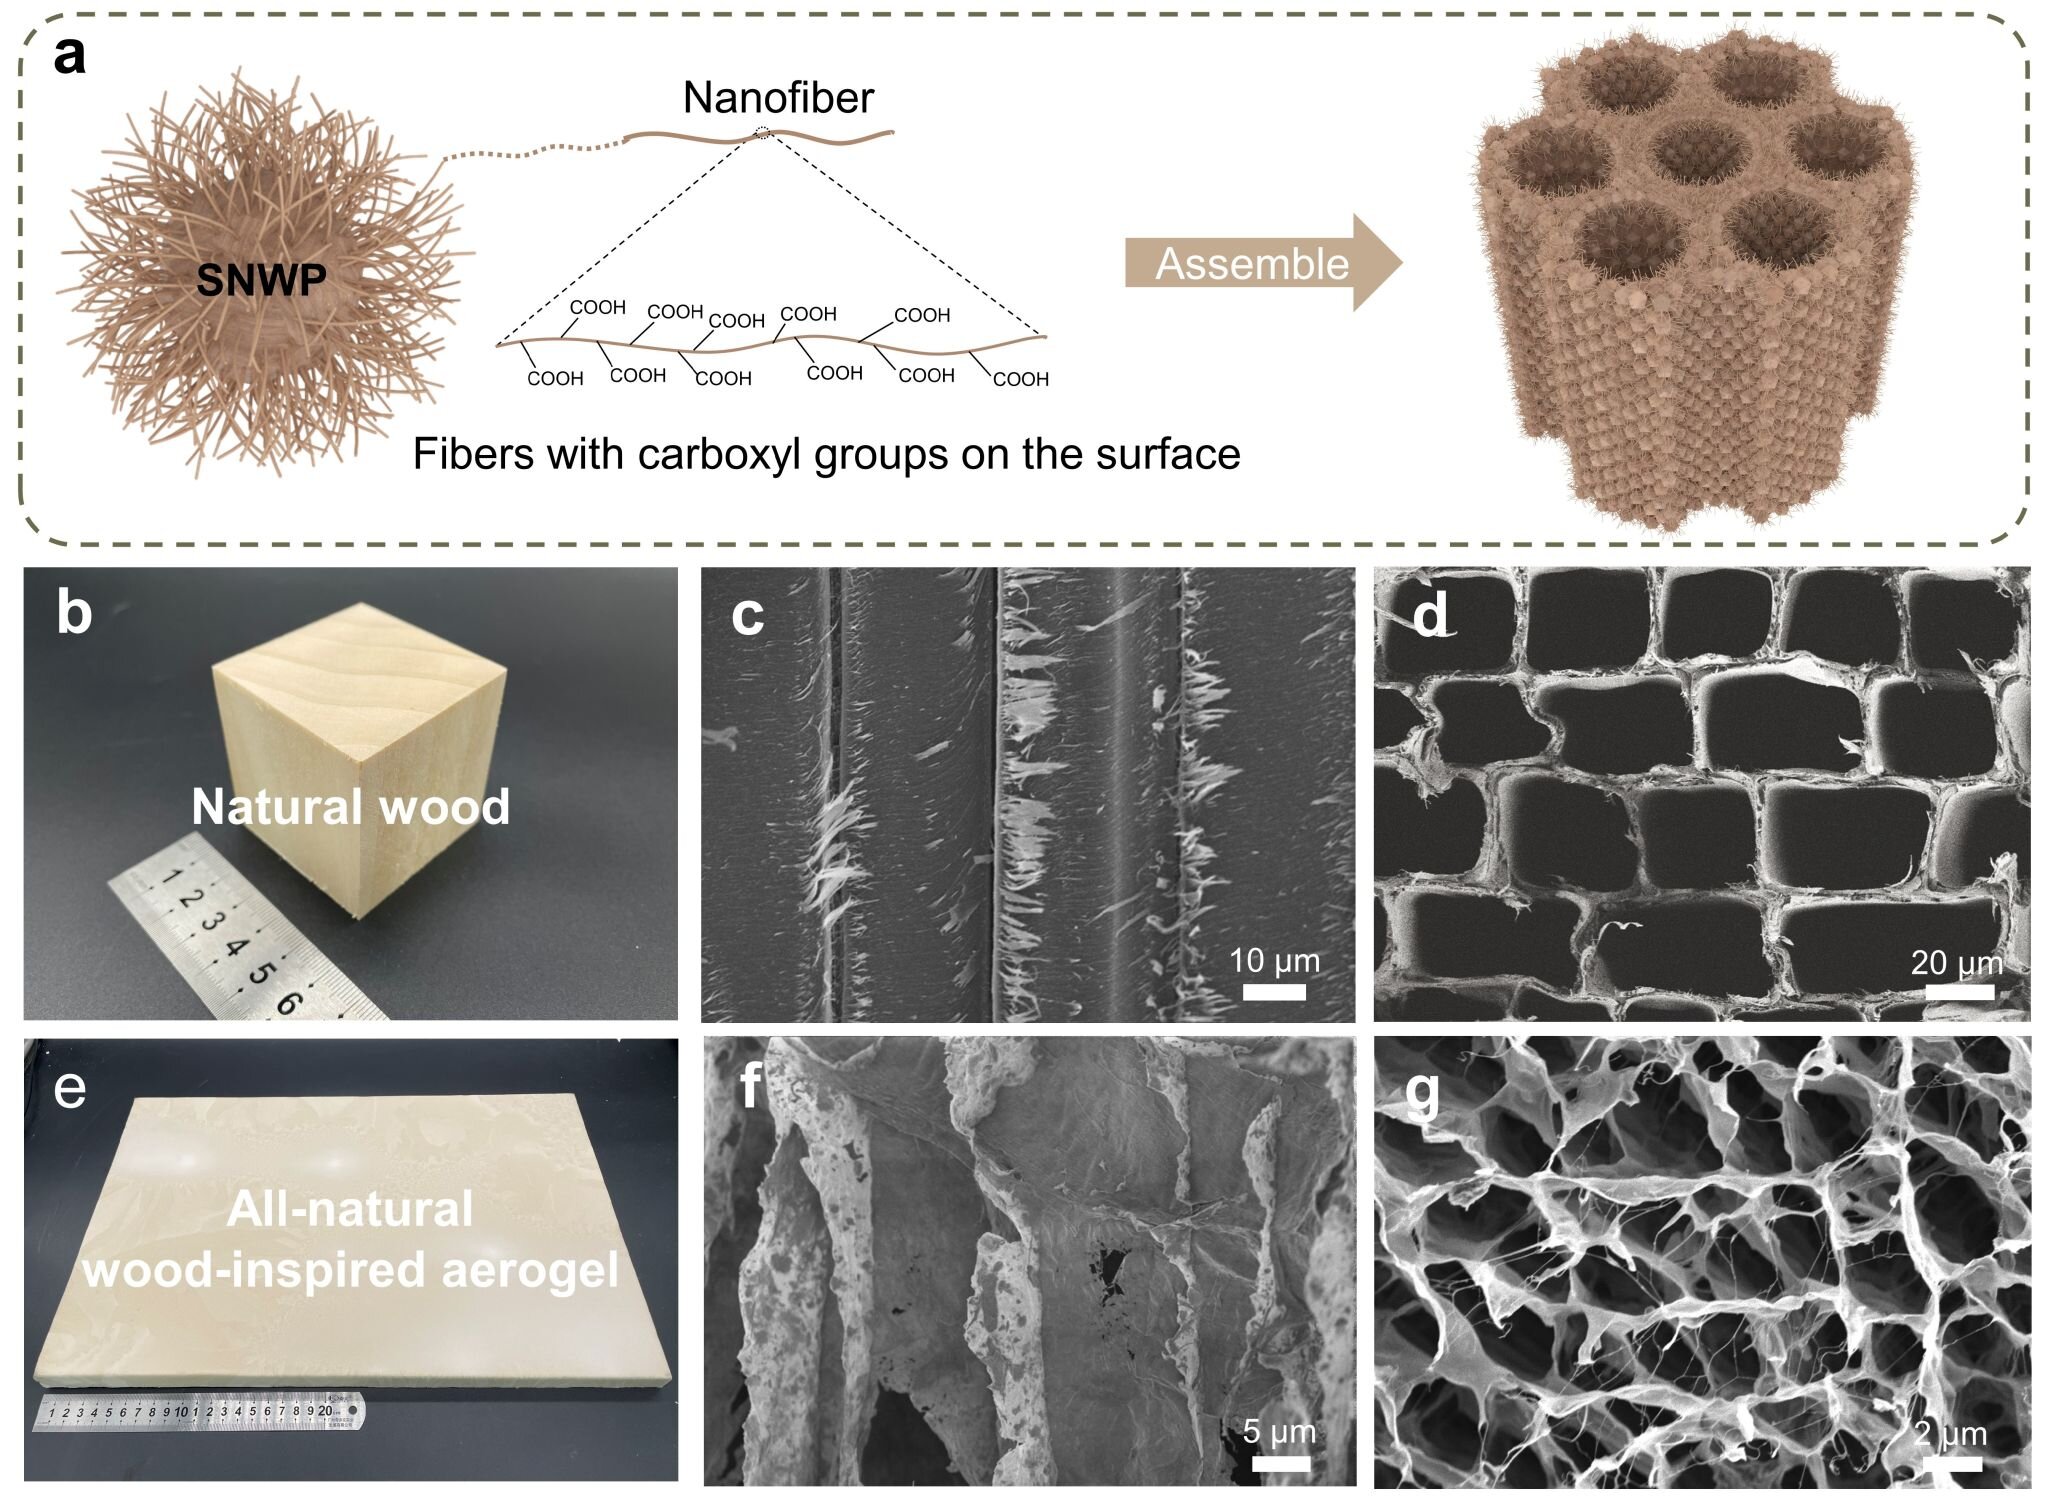 An All‐Natural Wood‐Inspired Aerogel - Han - 2023 - Angewandte Chemie  International Edition - Wiley Online Library